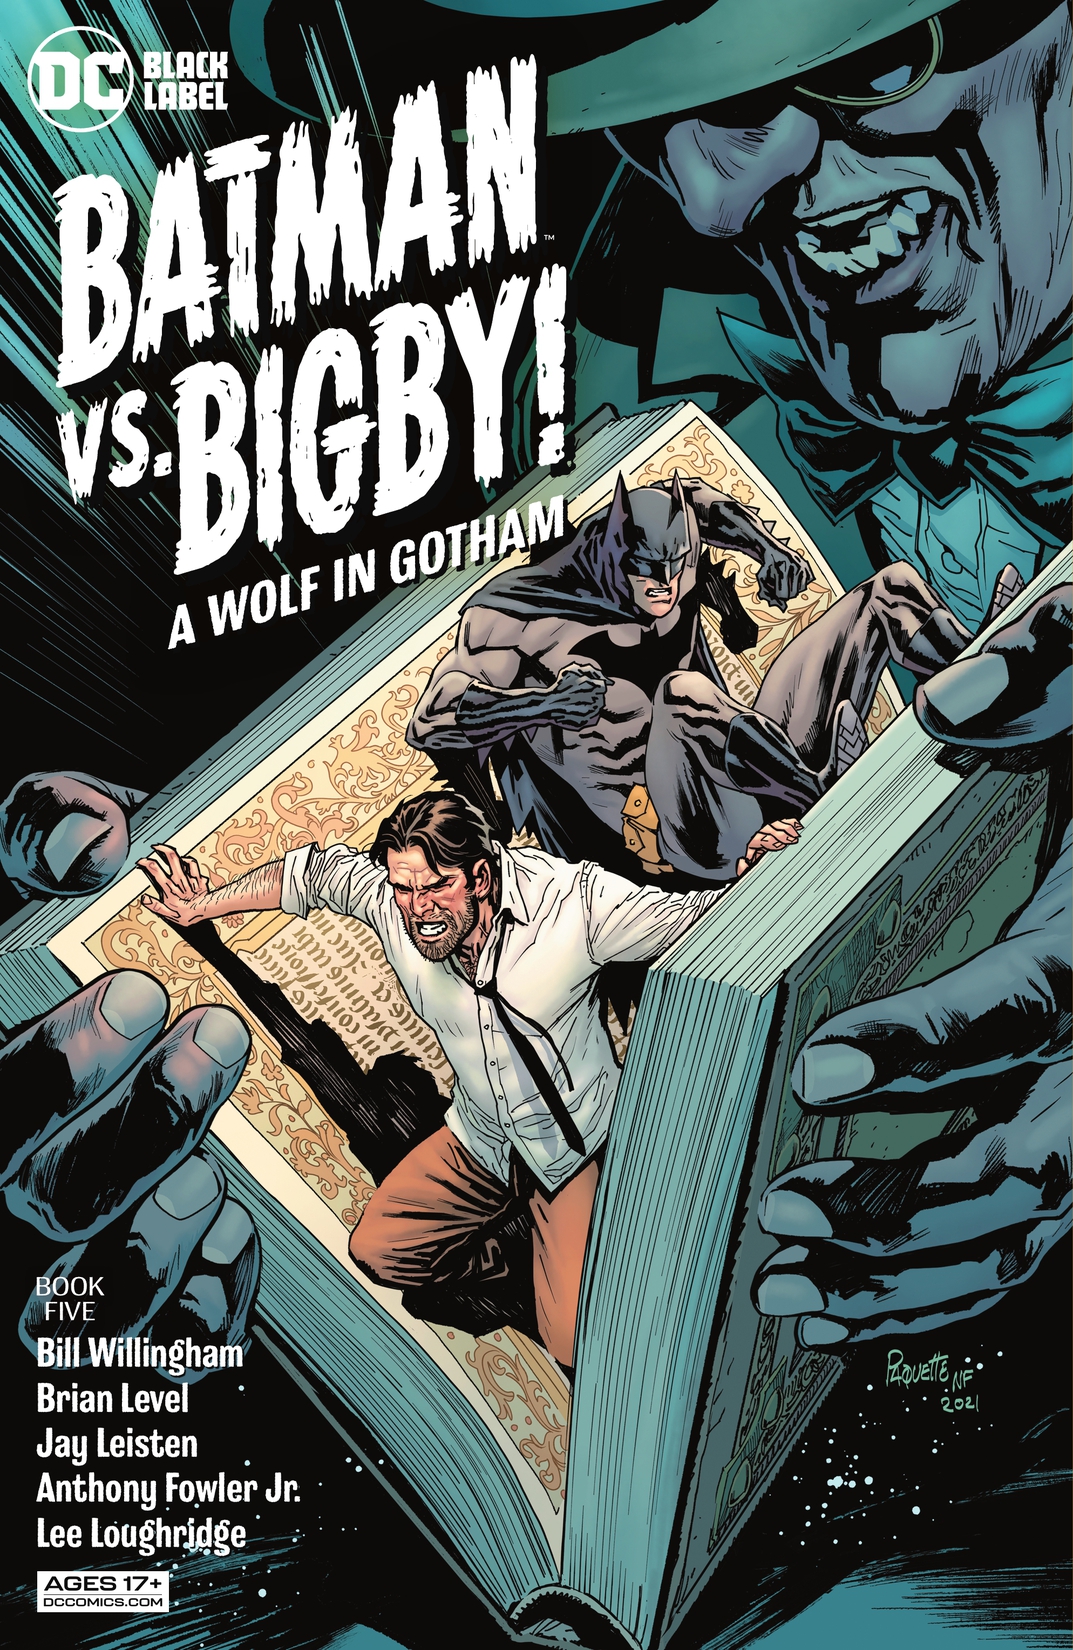 Batman Vs. Bigby! A Wolf In Gotham #5 preview images